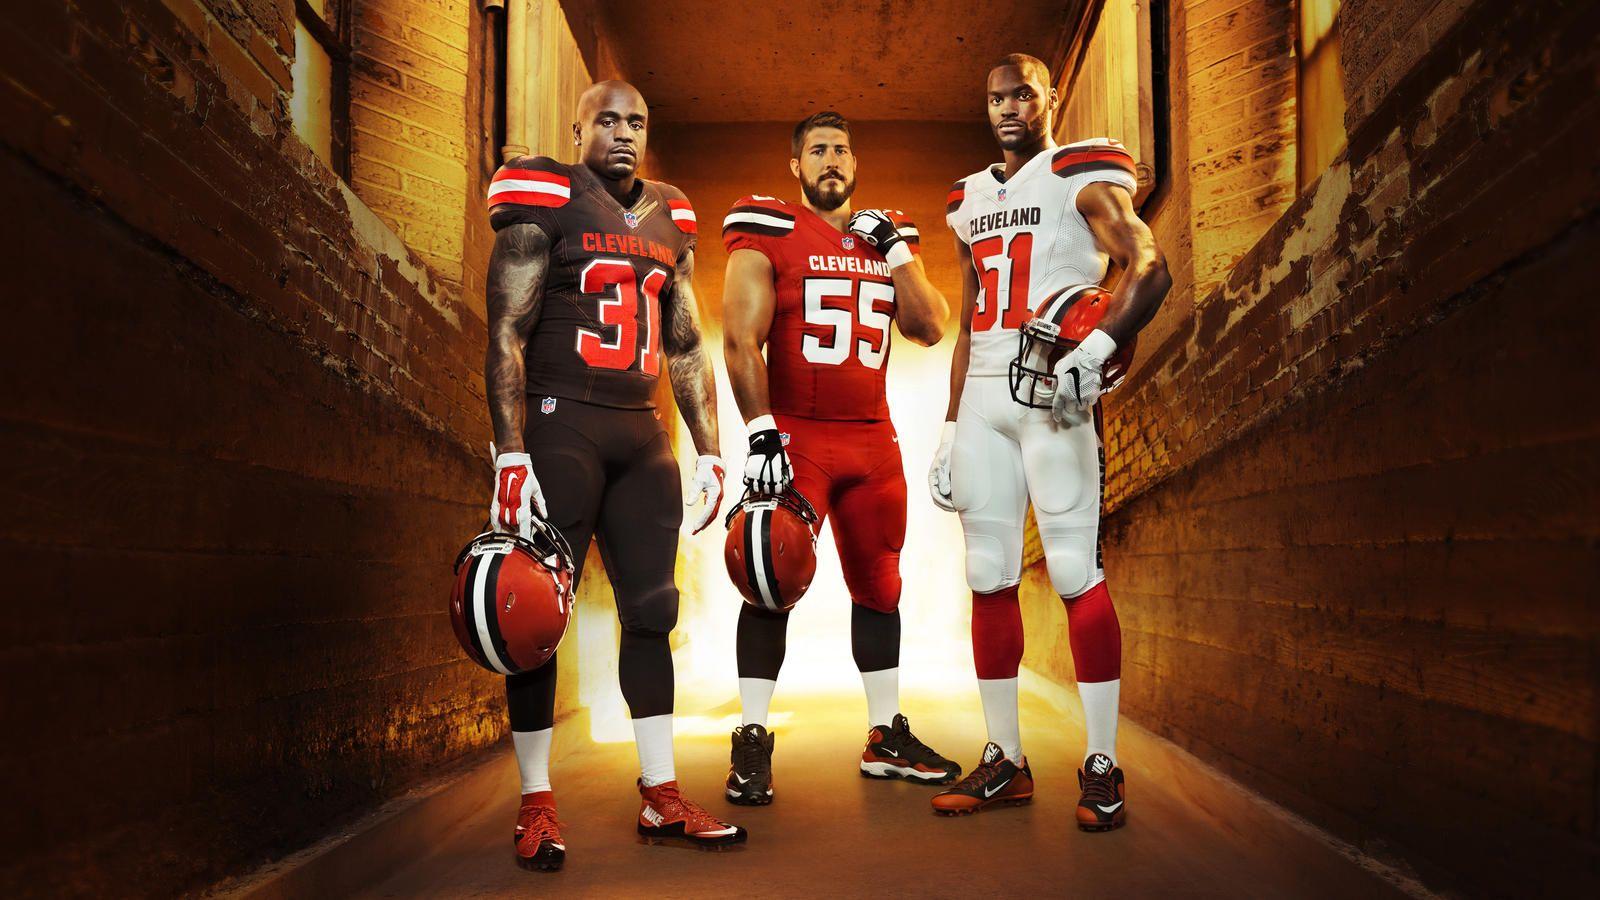 Cleveland Browns Celebrate Their Fans and Team History With New NFL Nike Elite 51 Uniform Design